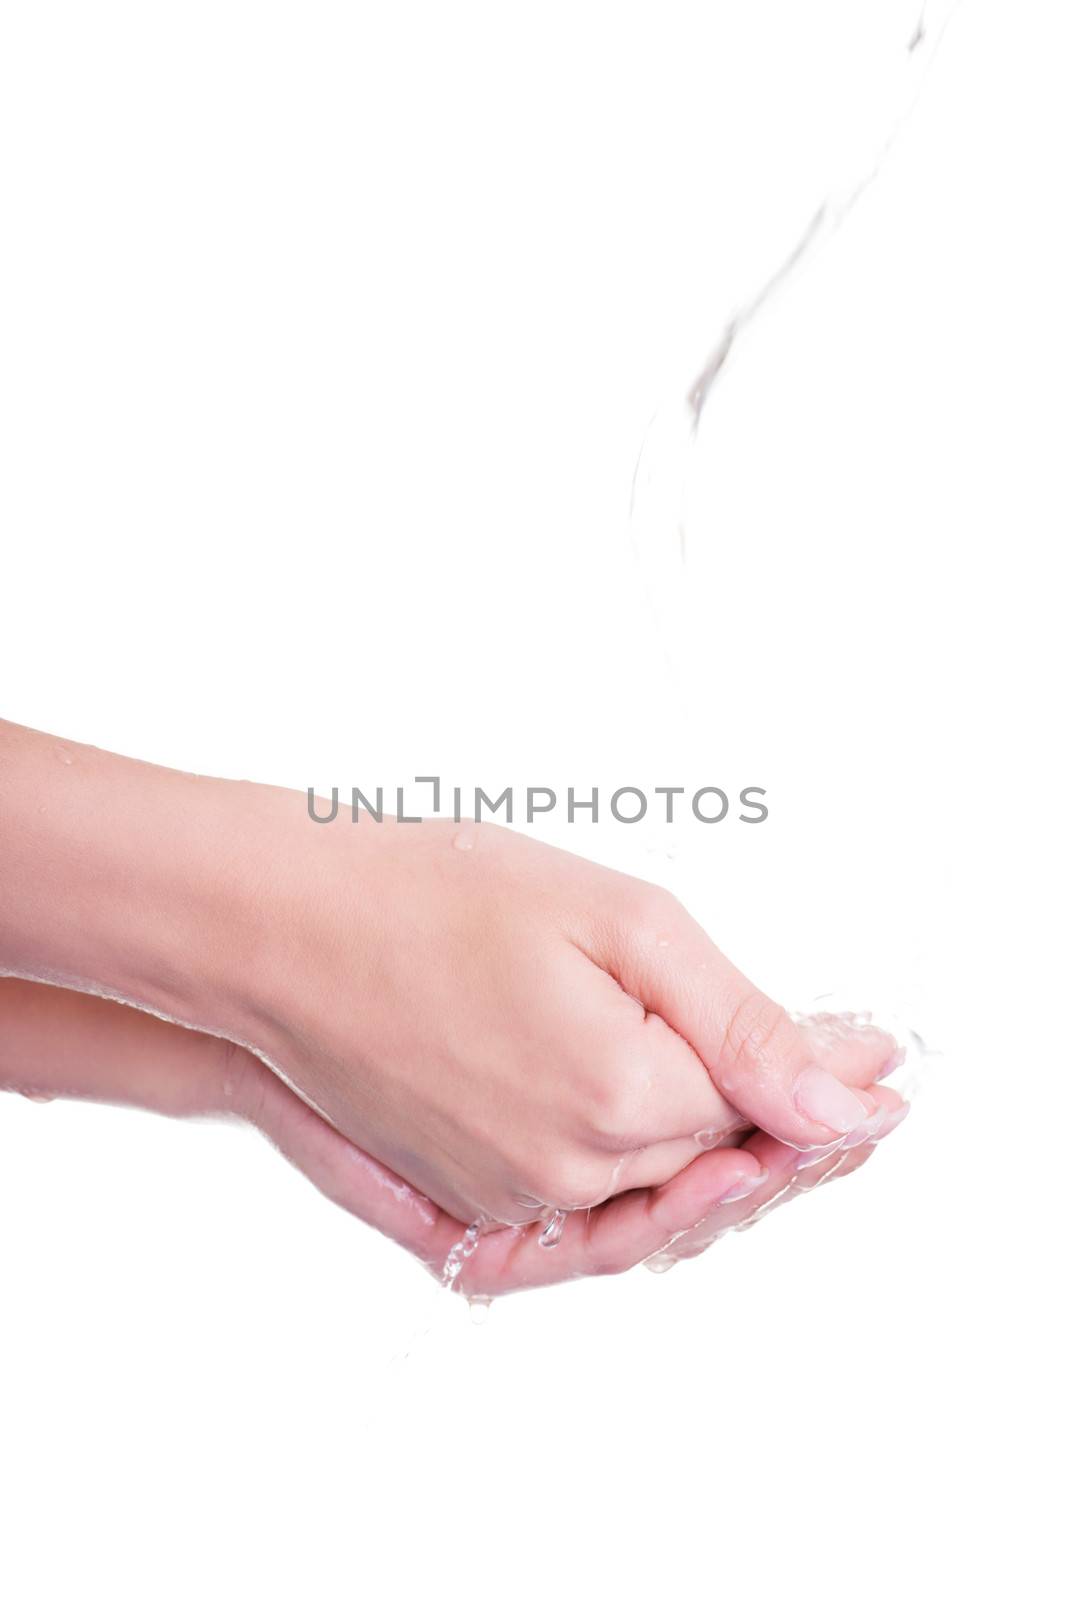 Pouring water splashing on hand, isolated on white